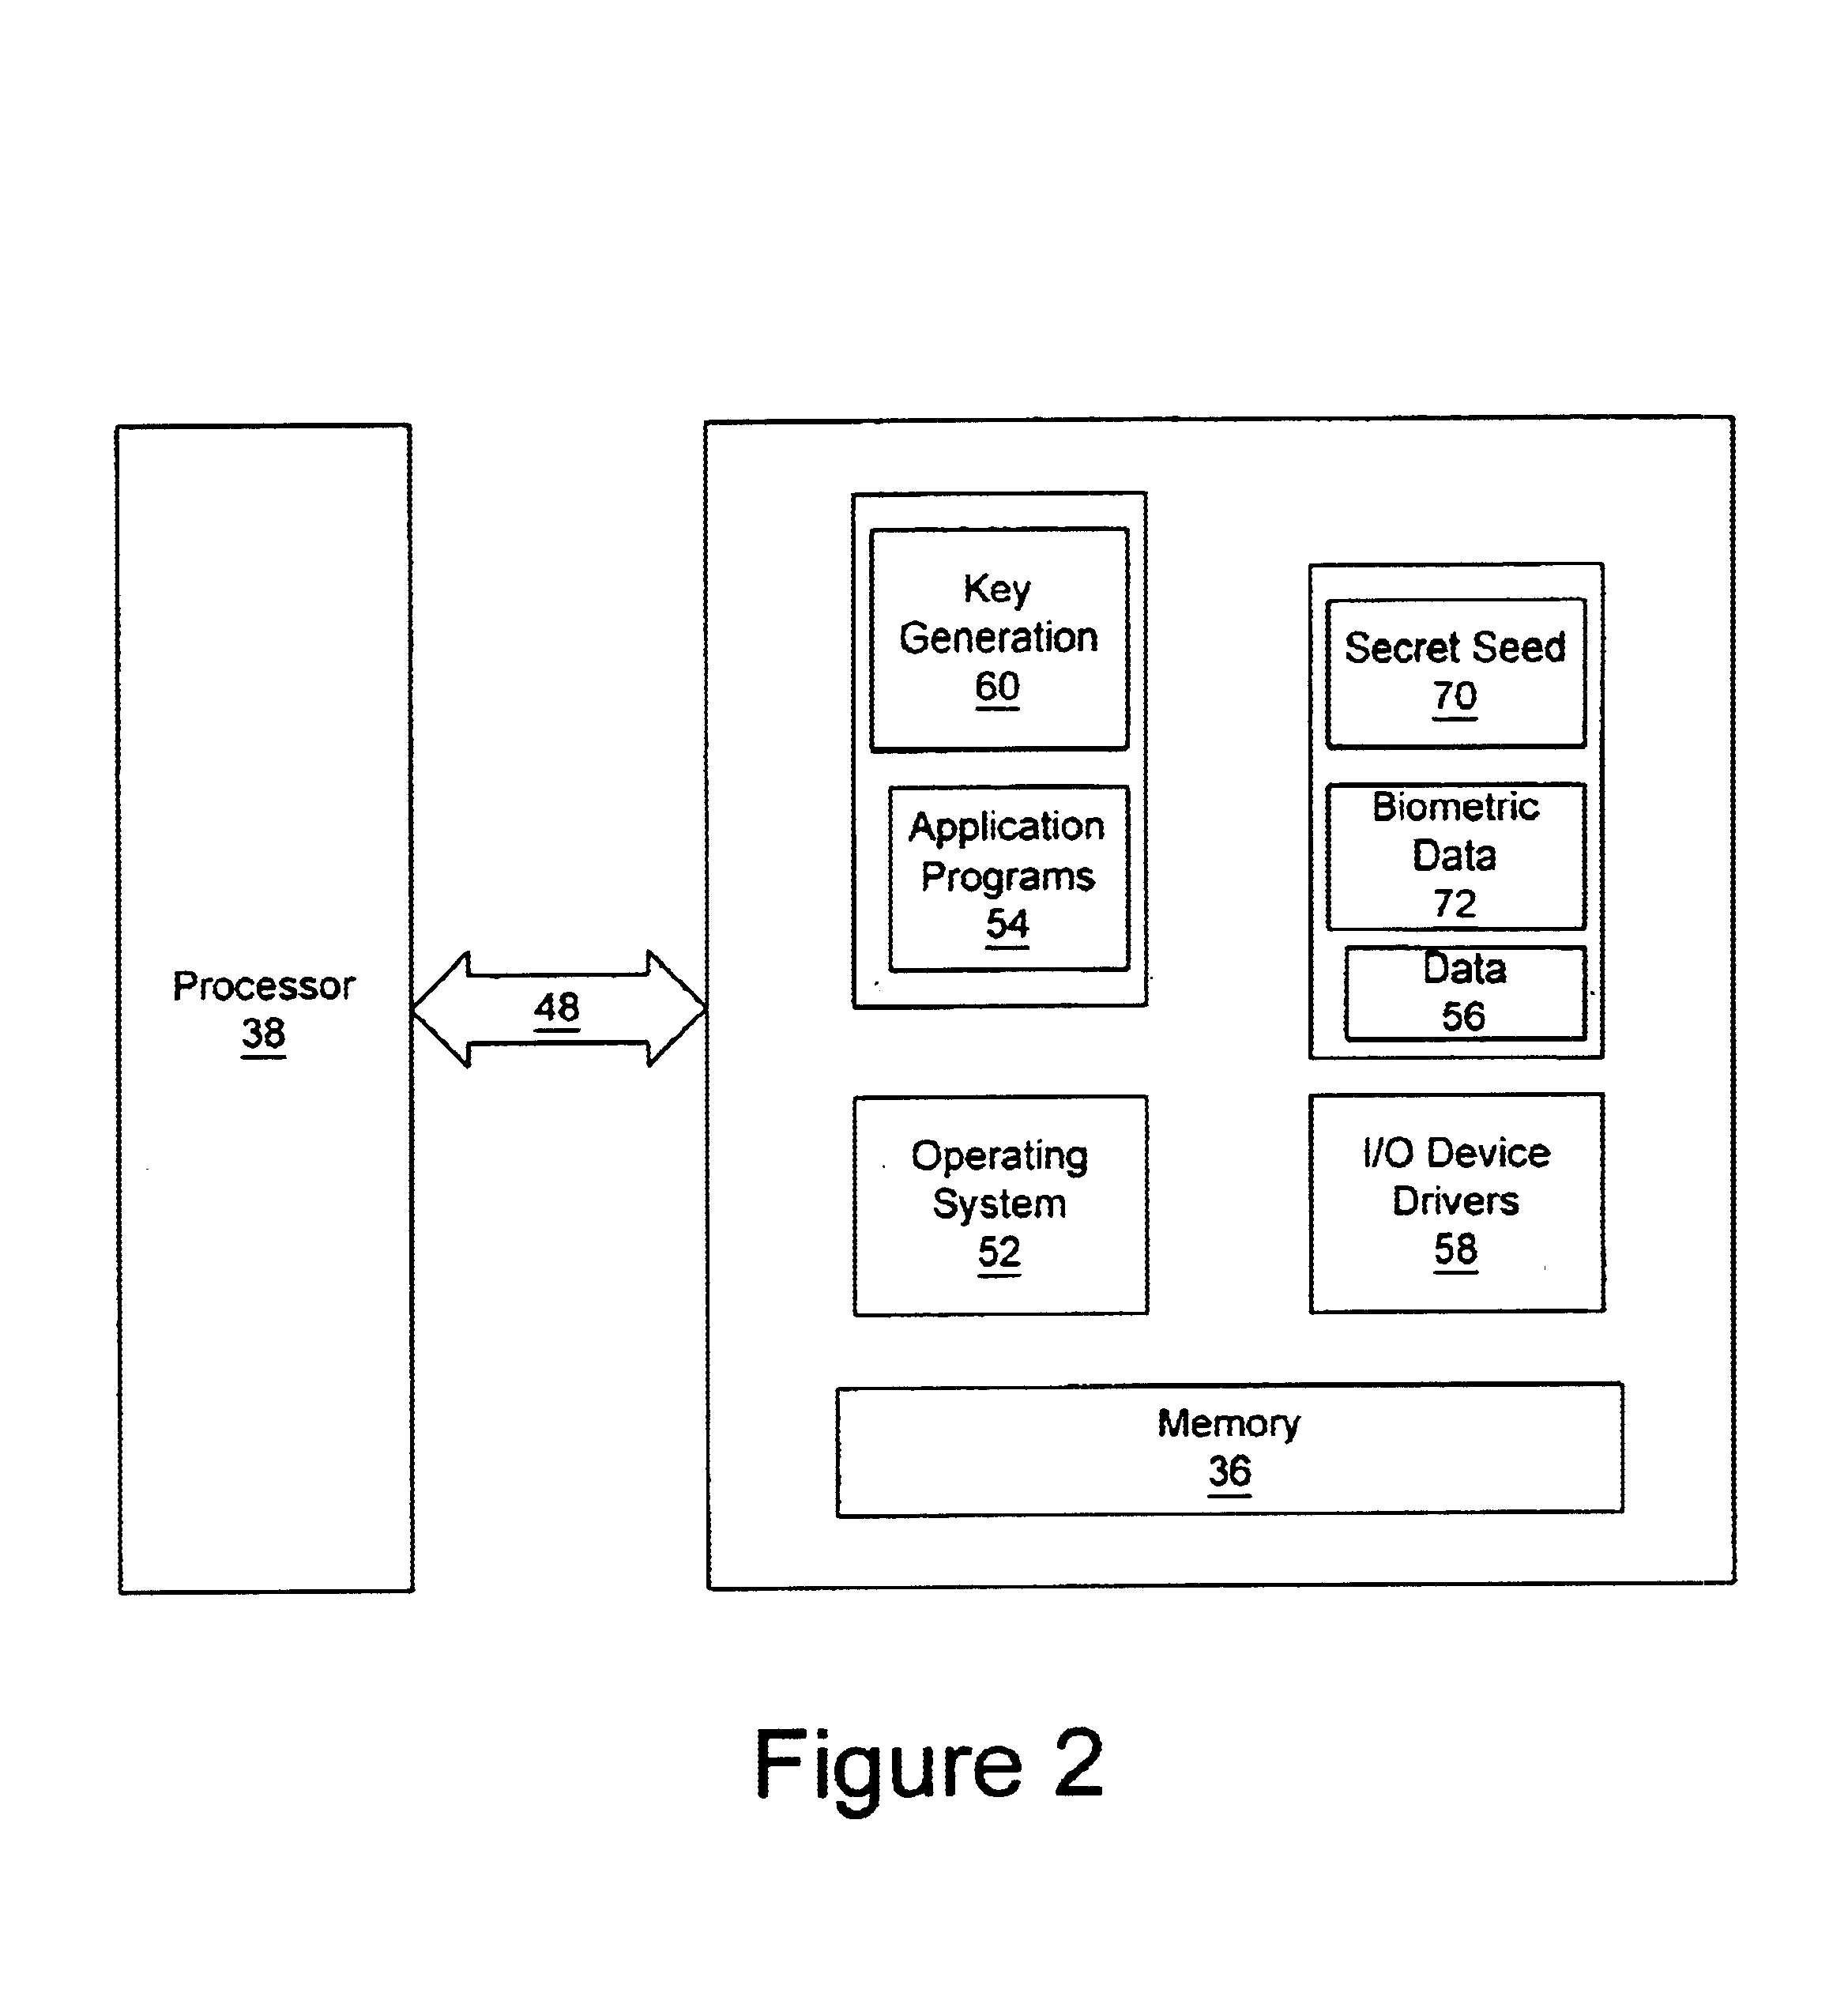 Methods, systems and computer program products for generating user-dependent RSA values without storing seeds